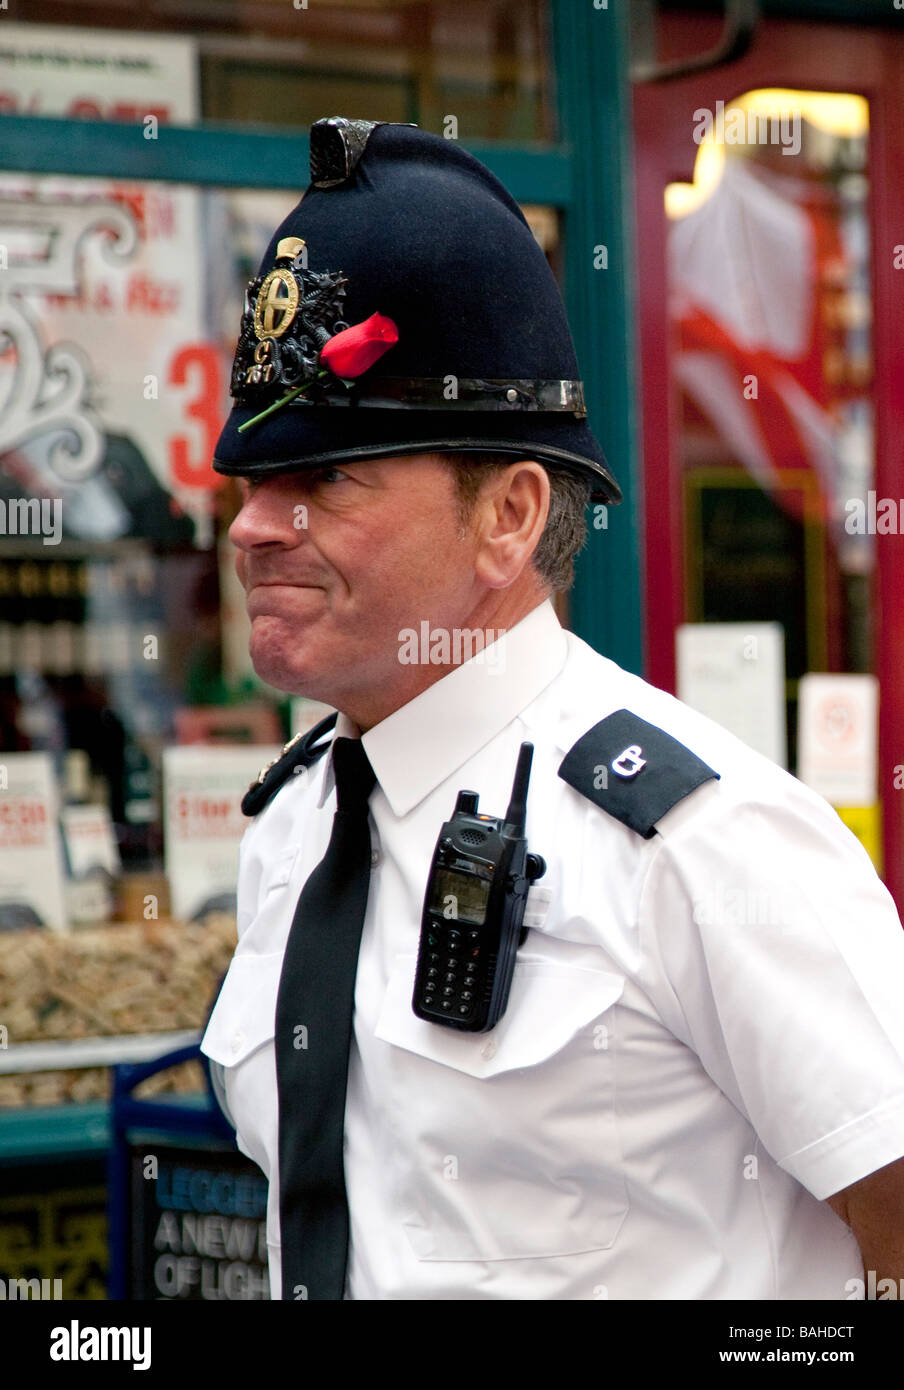 City Of London Policeman with St Geoges Day rose Stock Photo